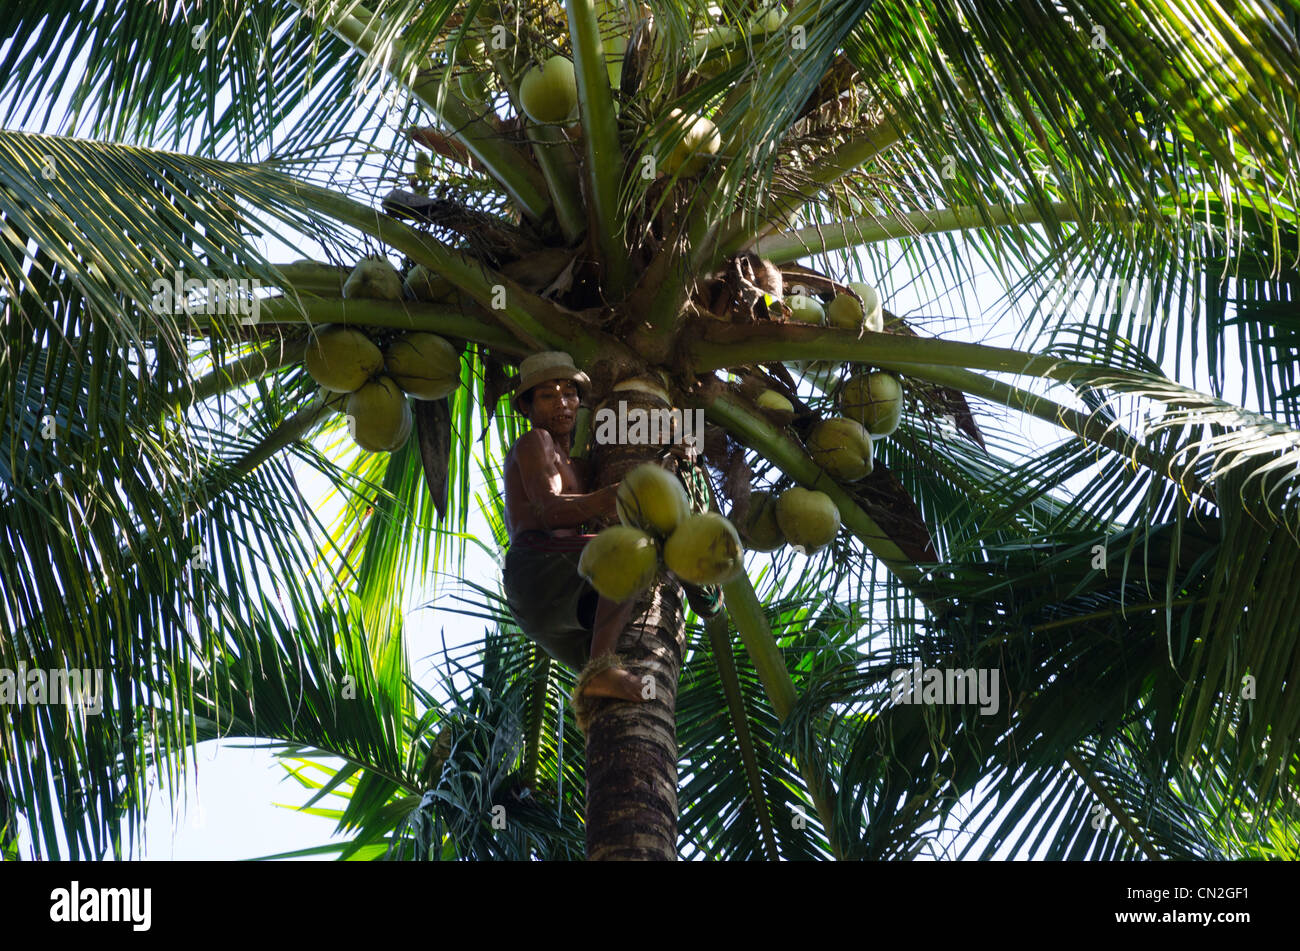 Man climbing a coconut tree to pick up cocnuts. Wah Gone village. Irrawaddy delta. Myanmar. Stock Photo